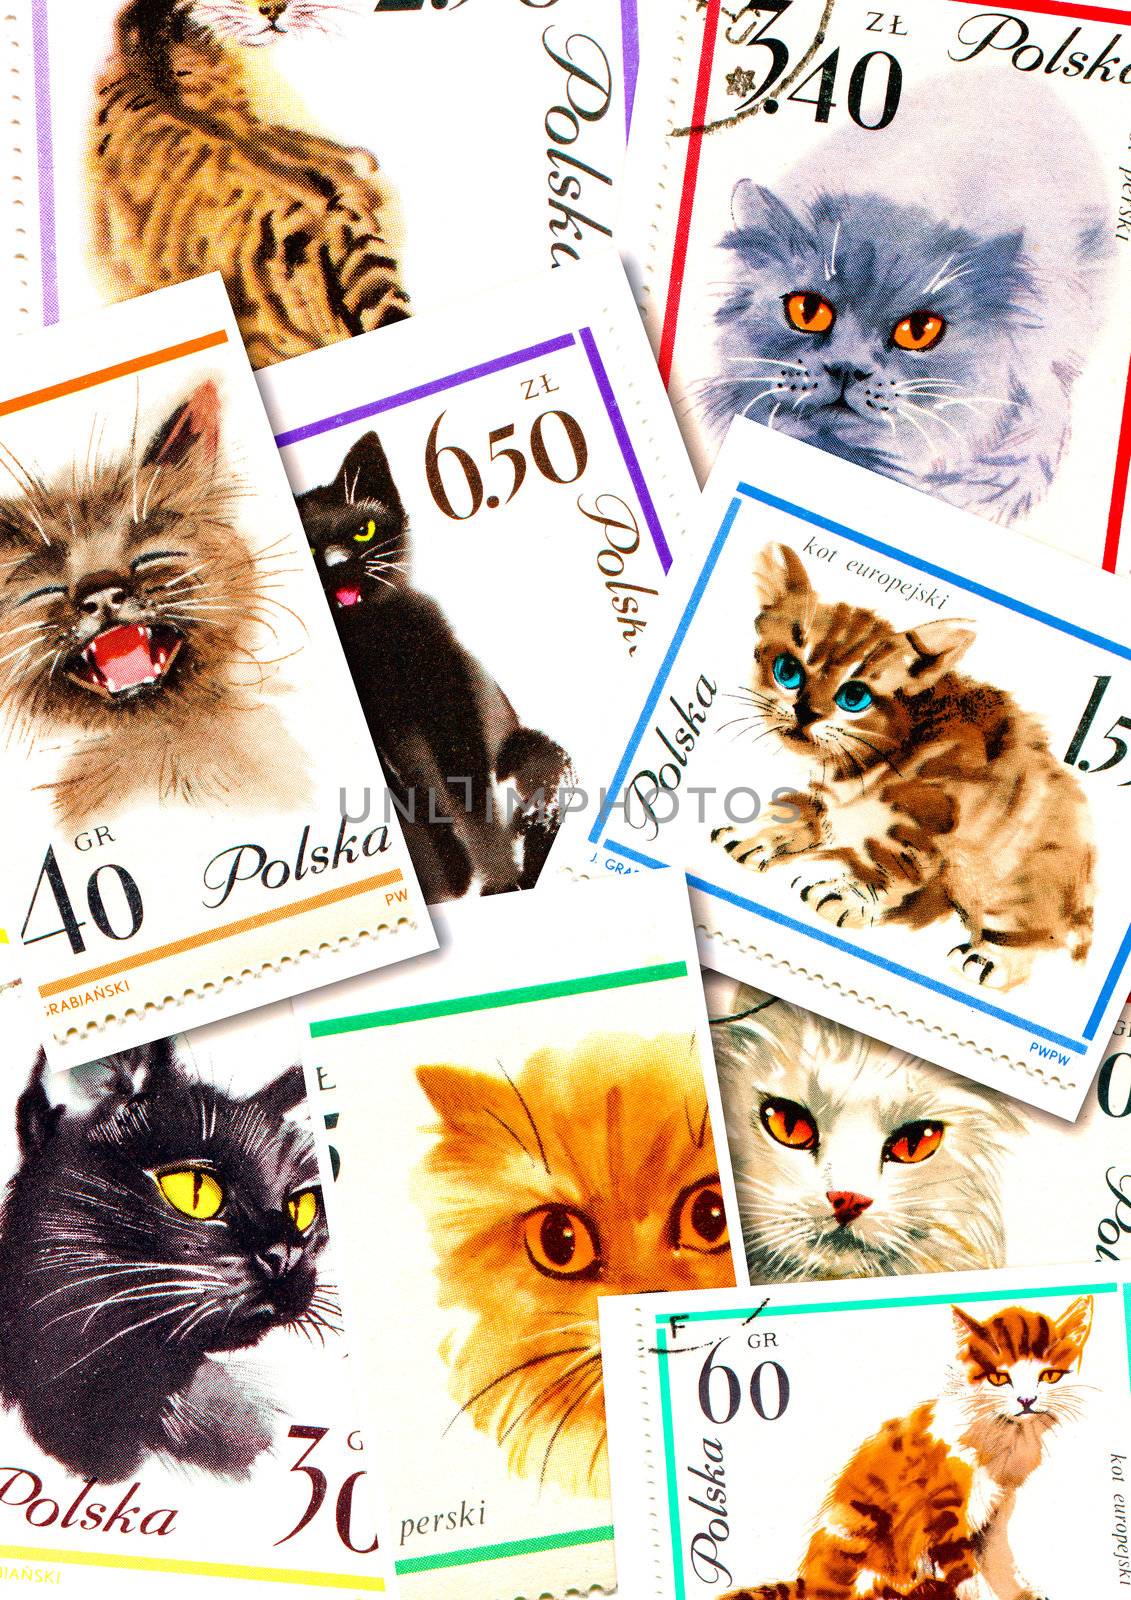 cats on collage of Polish postage stamps